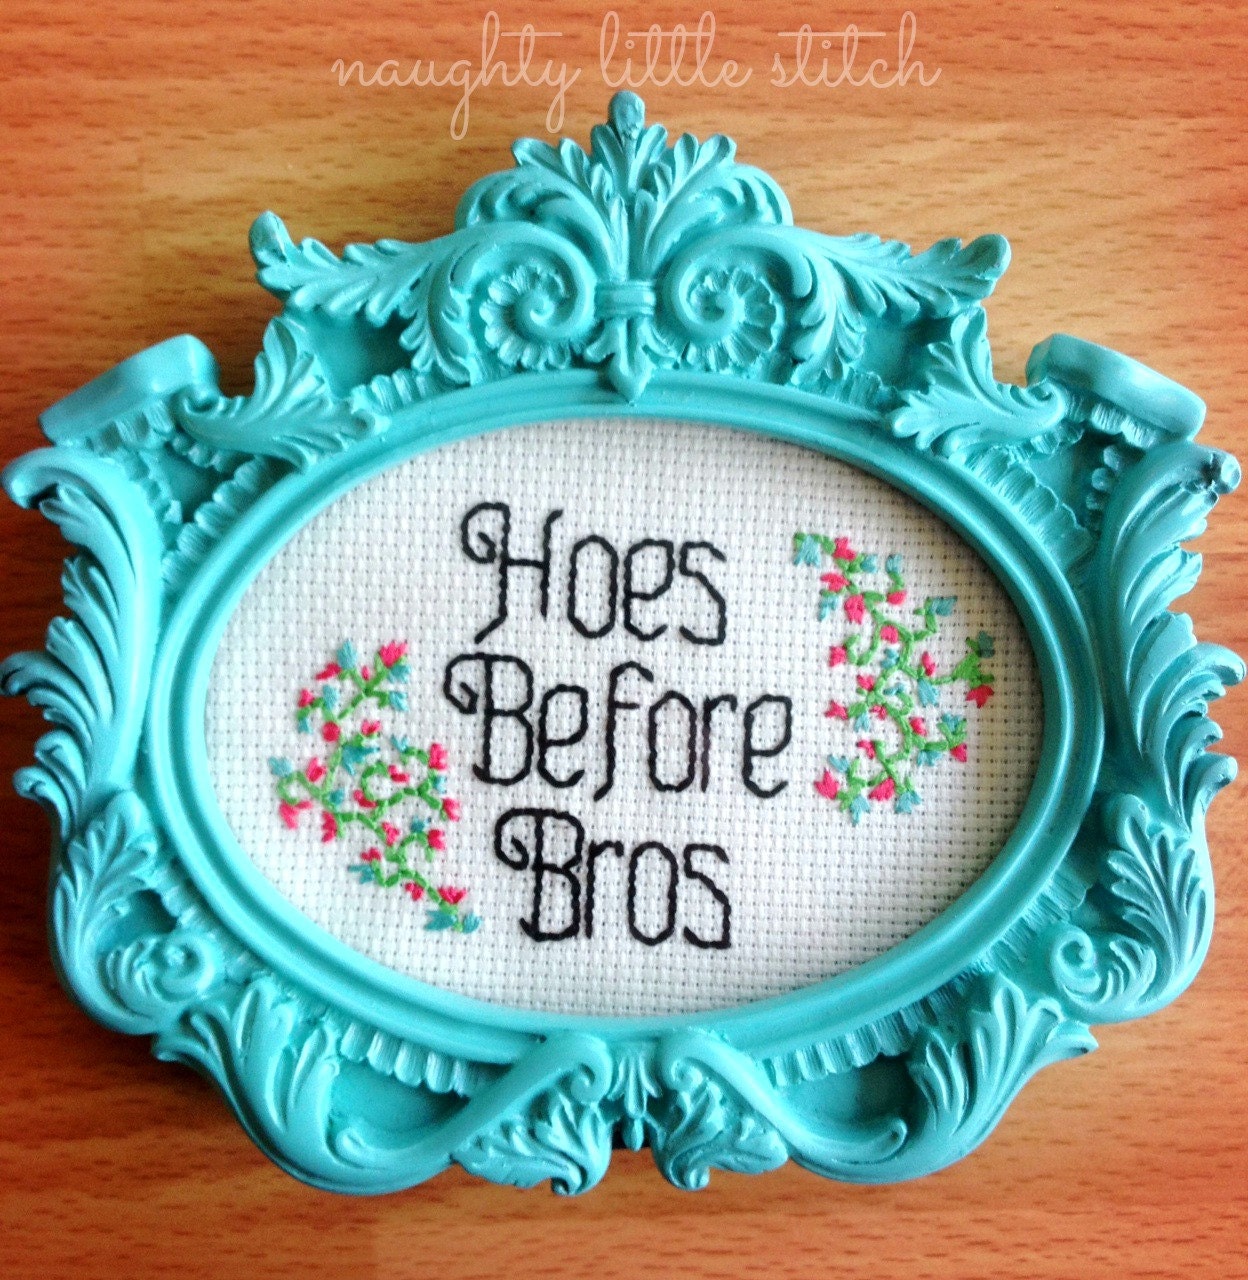 Hoes Before Bros - Finished and framed cross stitch - ornate turquoise frame